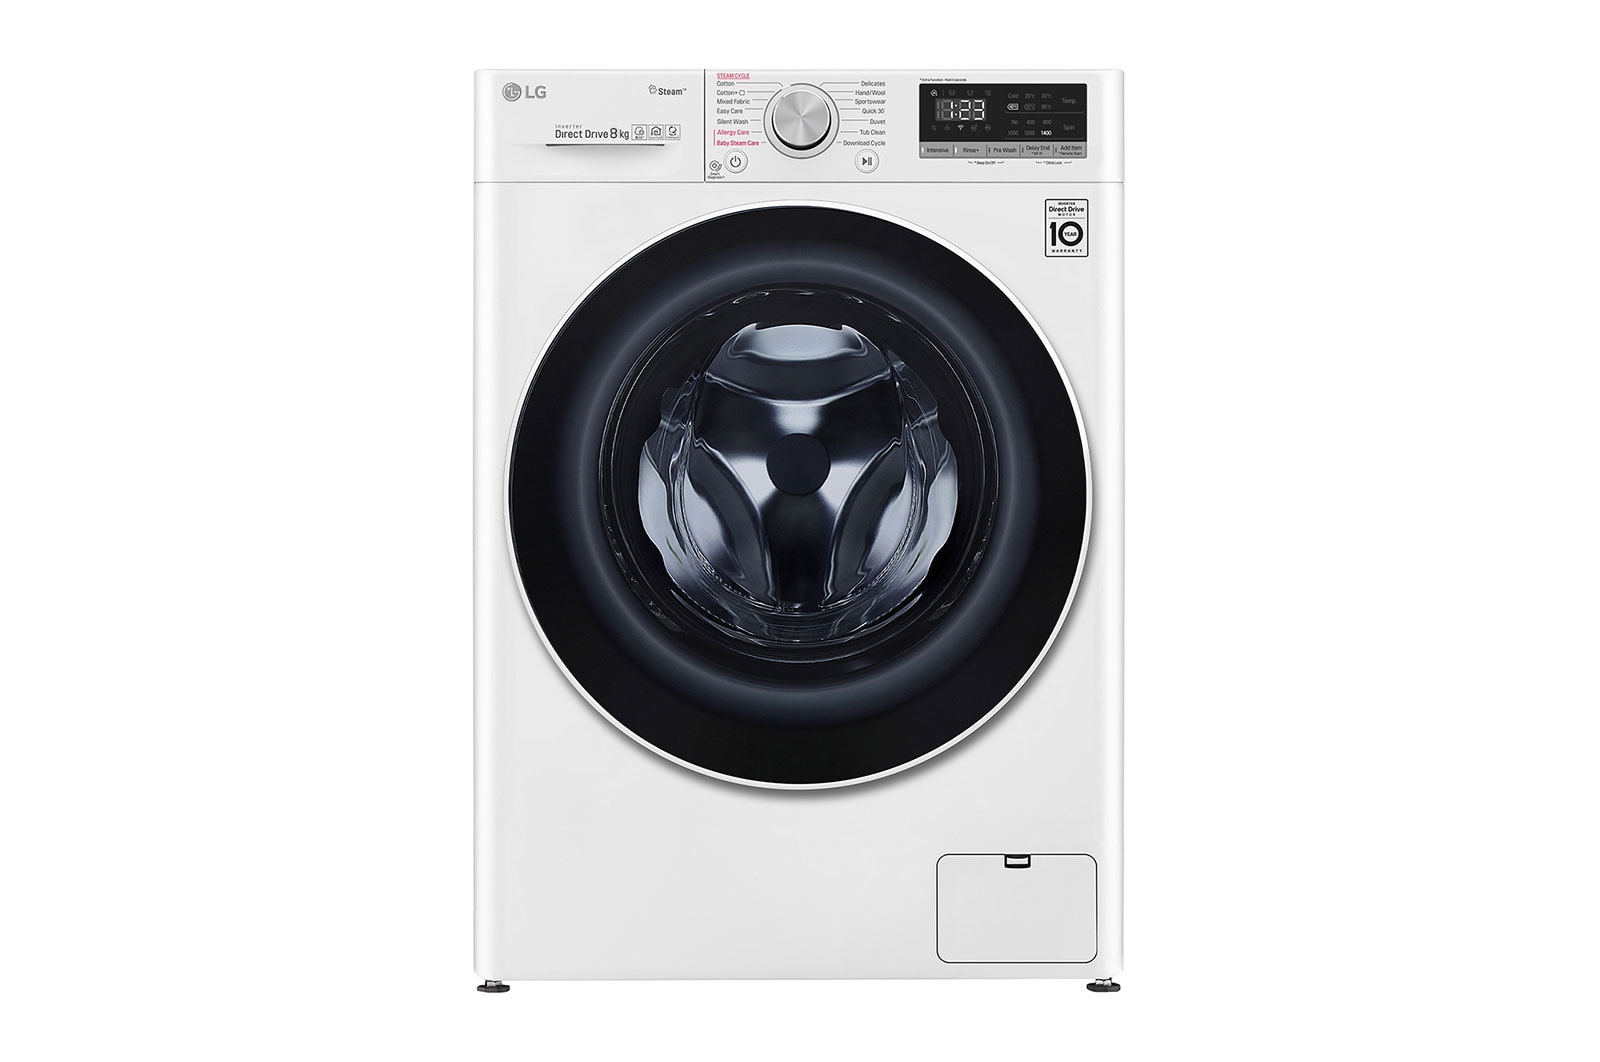 What Is Pre Wash On Lg Washer